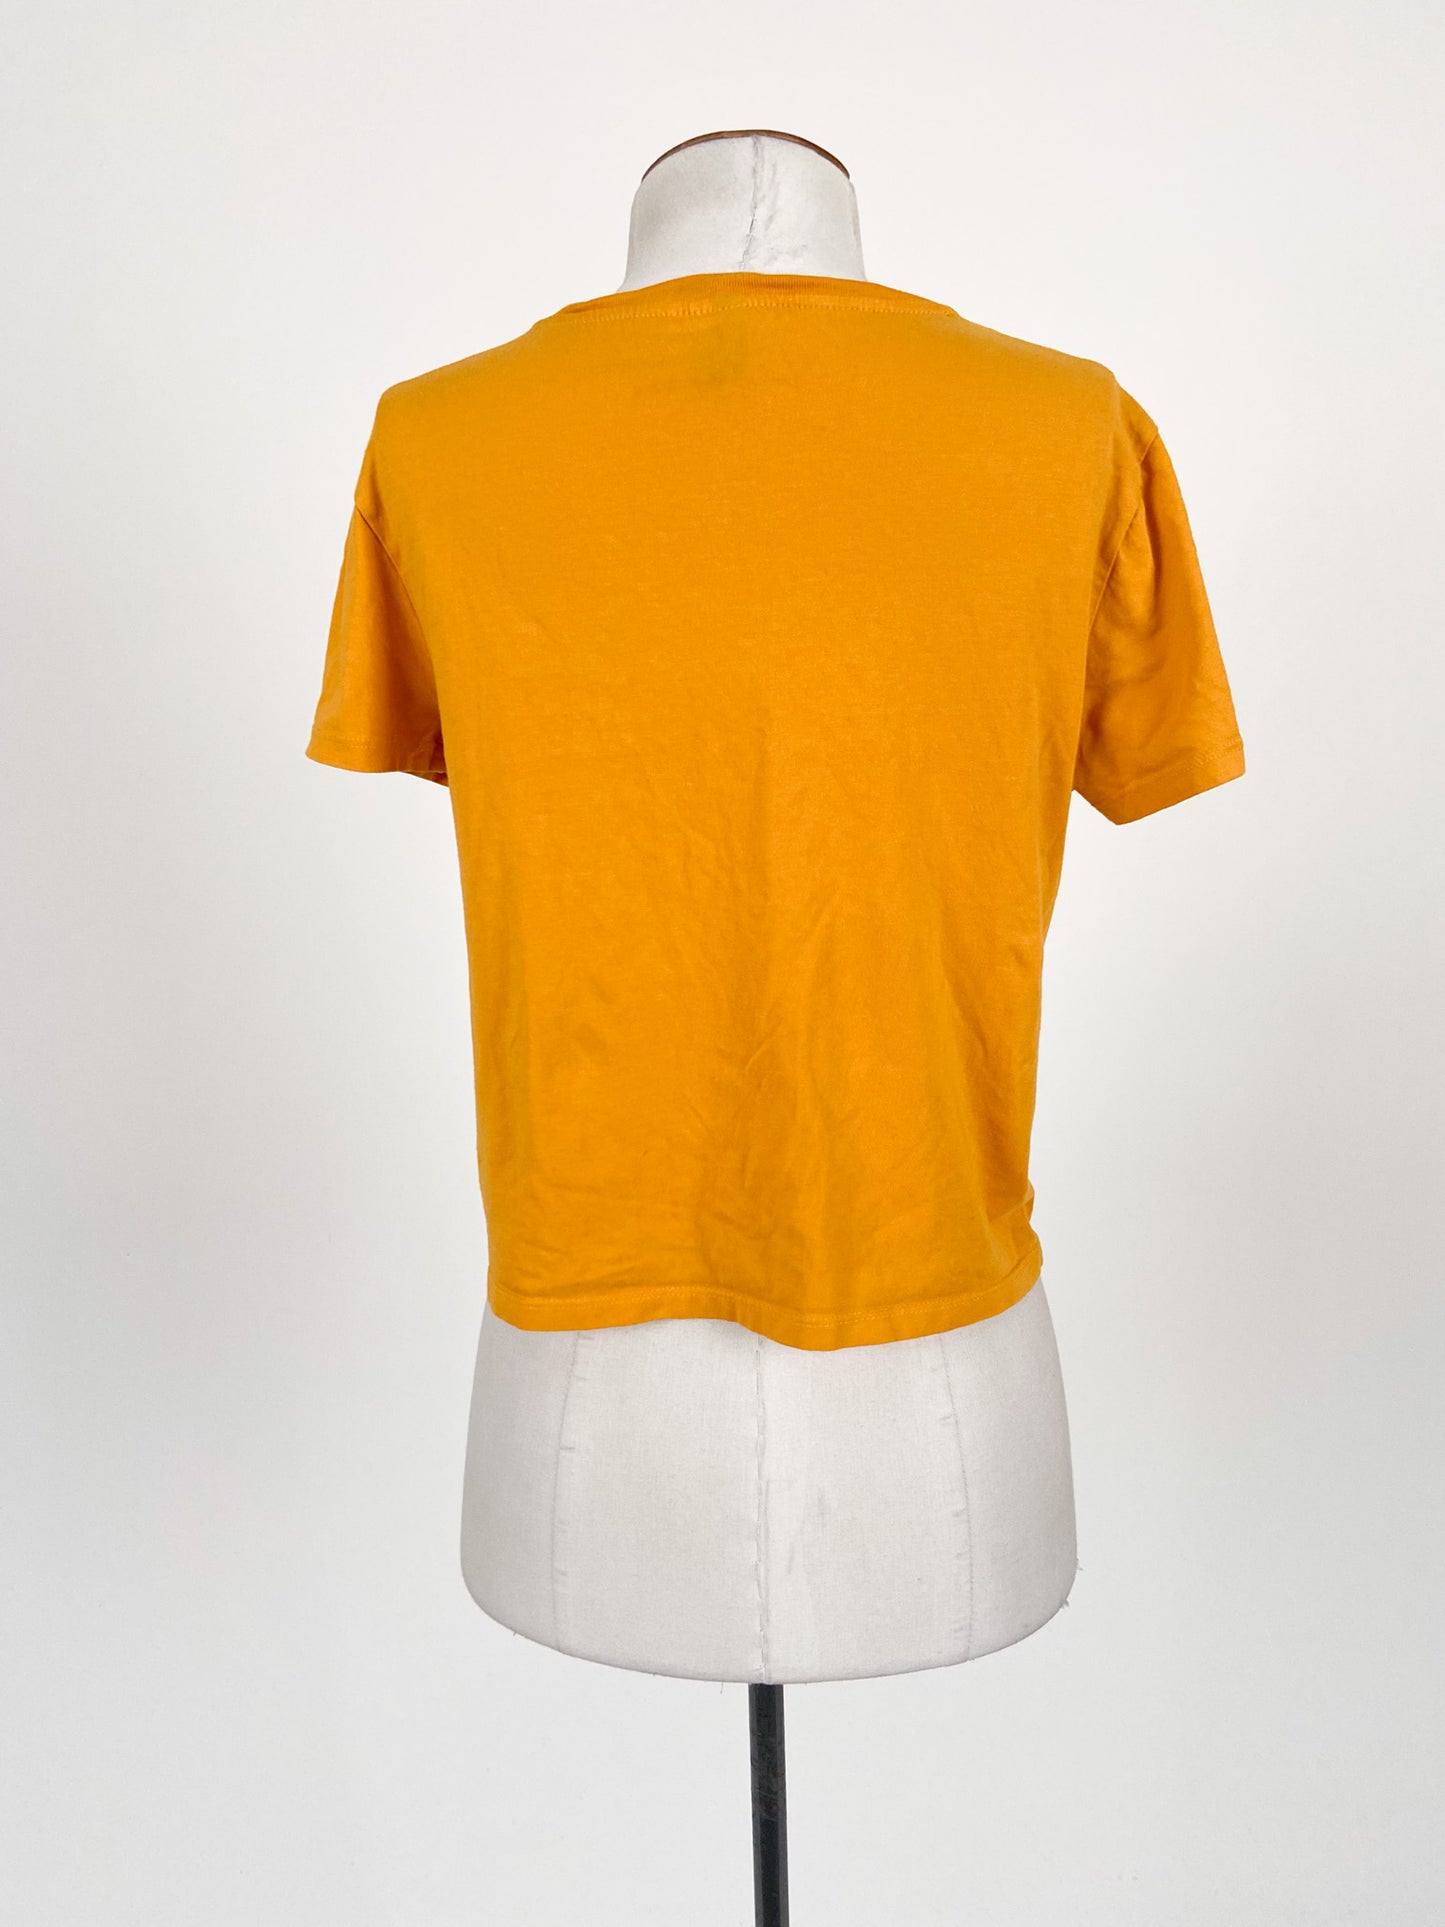 H&M | Yellow Casual Top | Size S